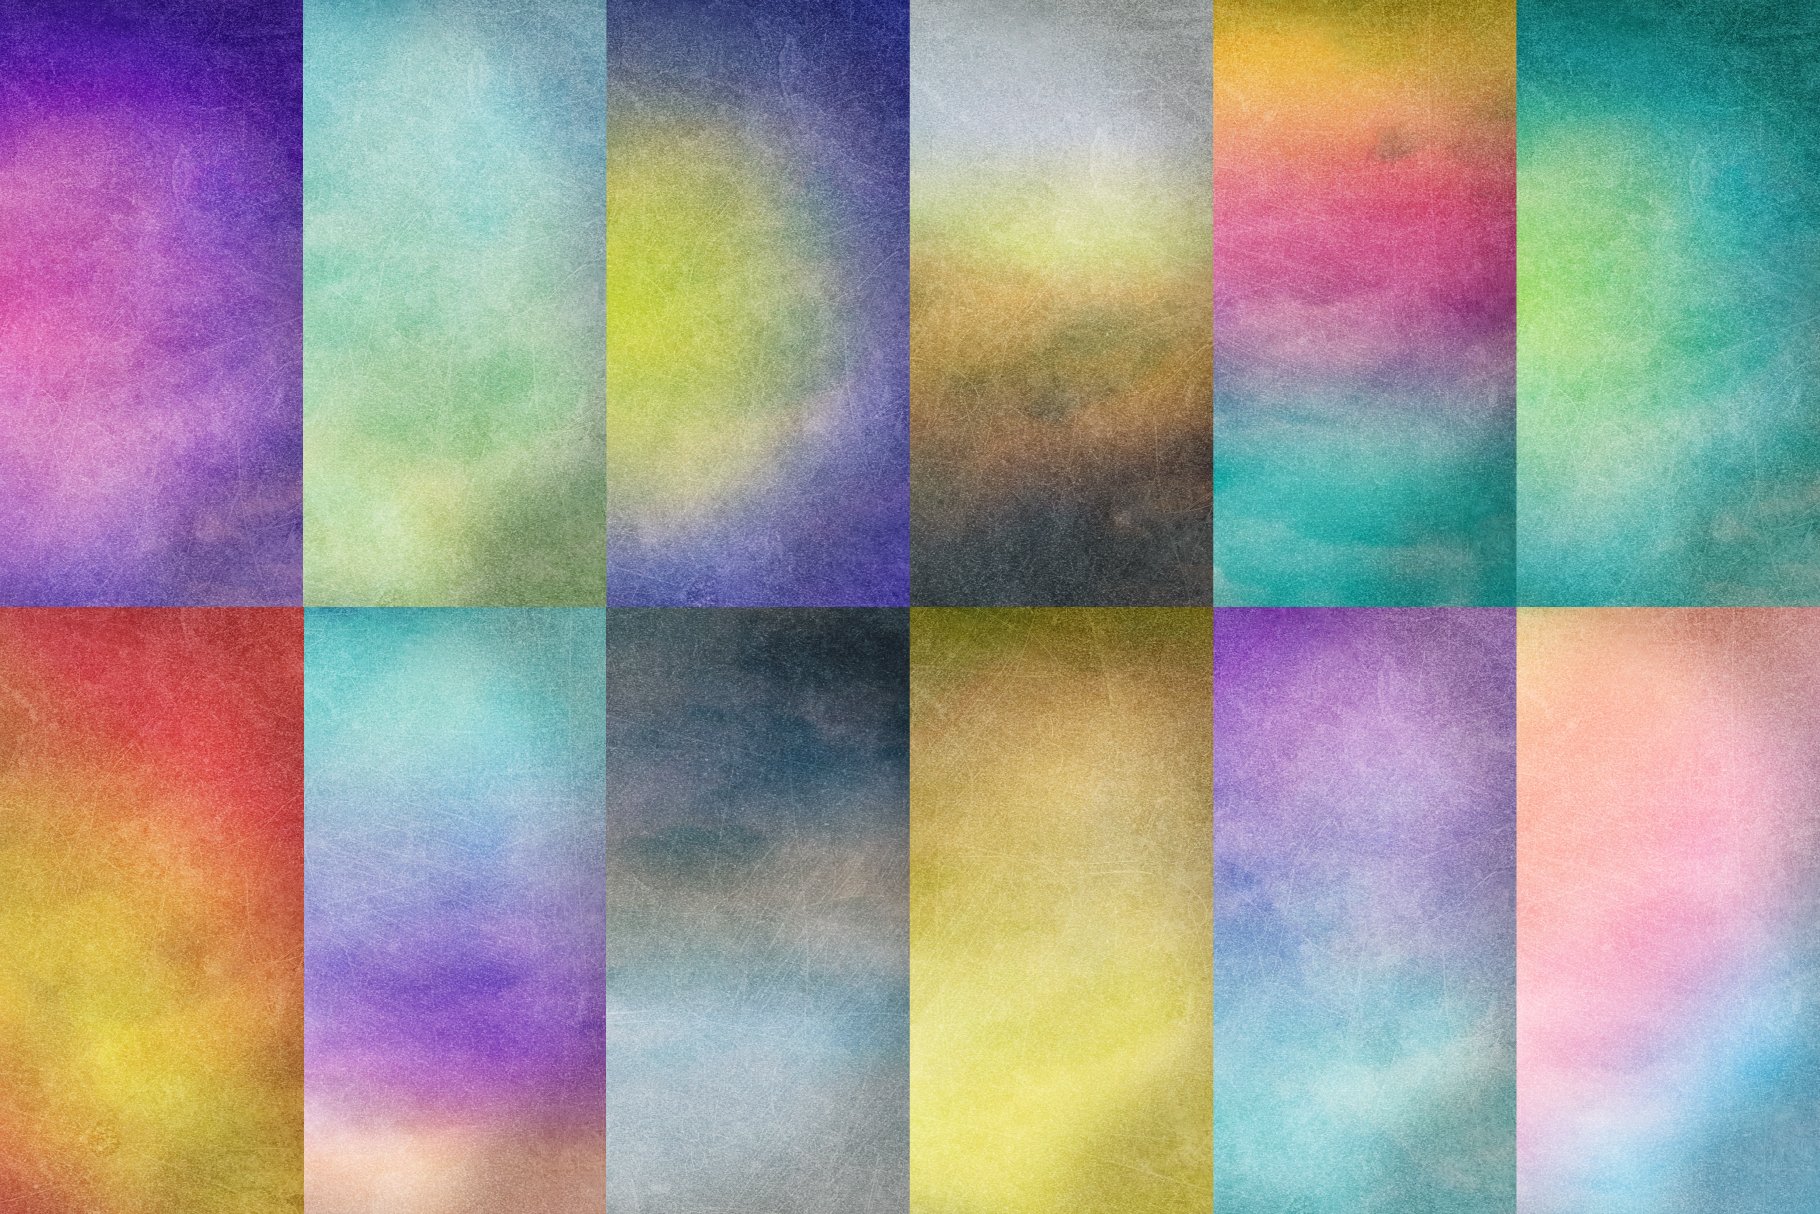 Set of 12 Grunge Gradient Textures cover image.